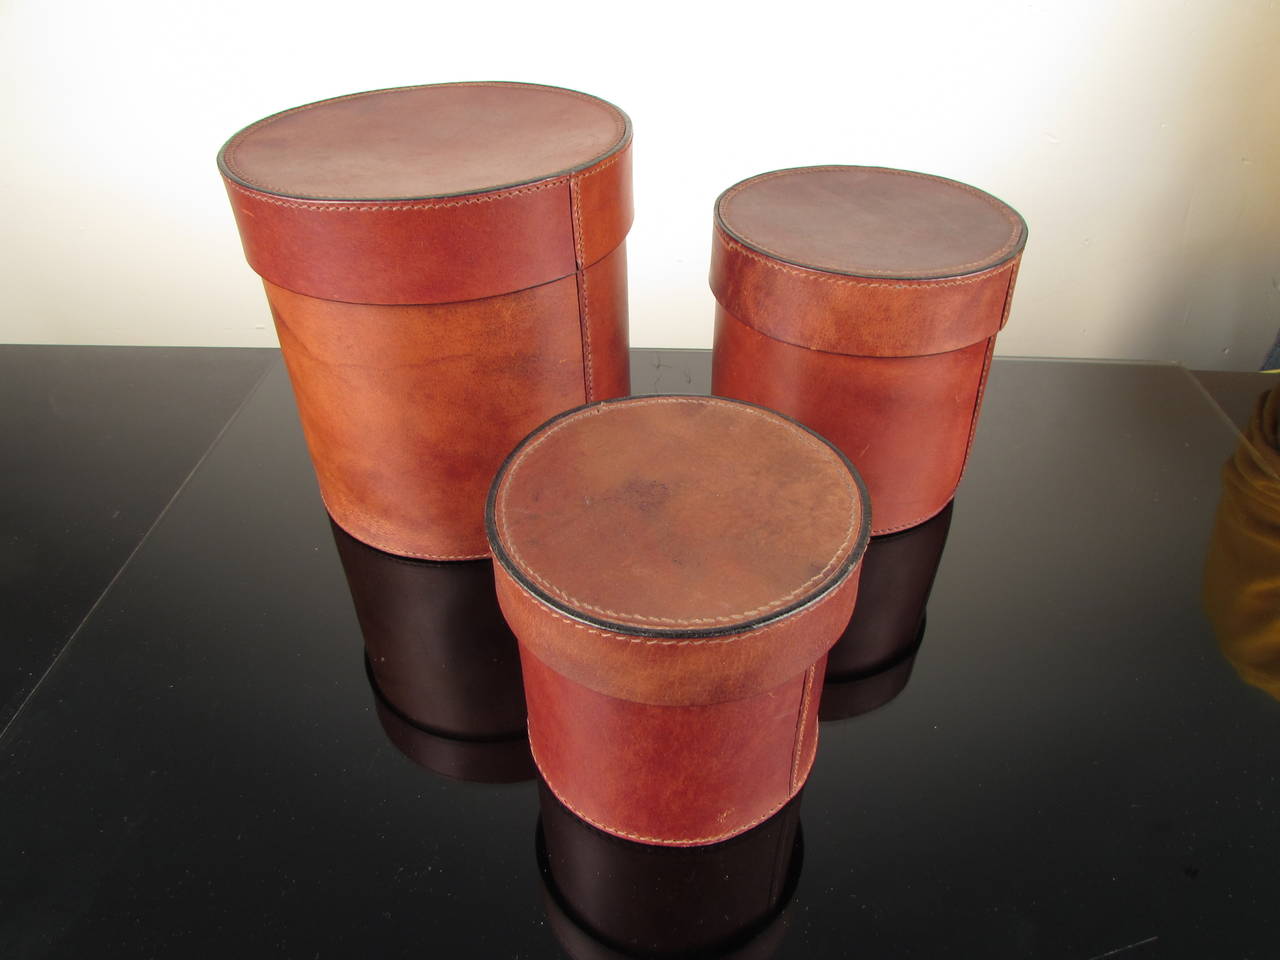 Handsome Trio of Buttery Leather Lidded Vessels 3